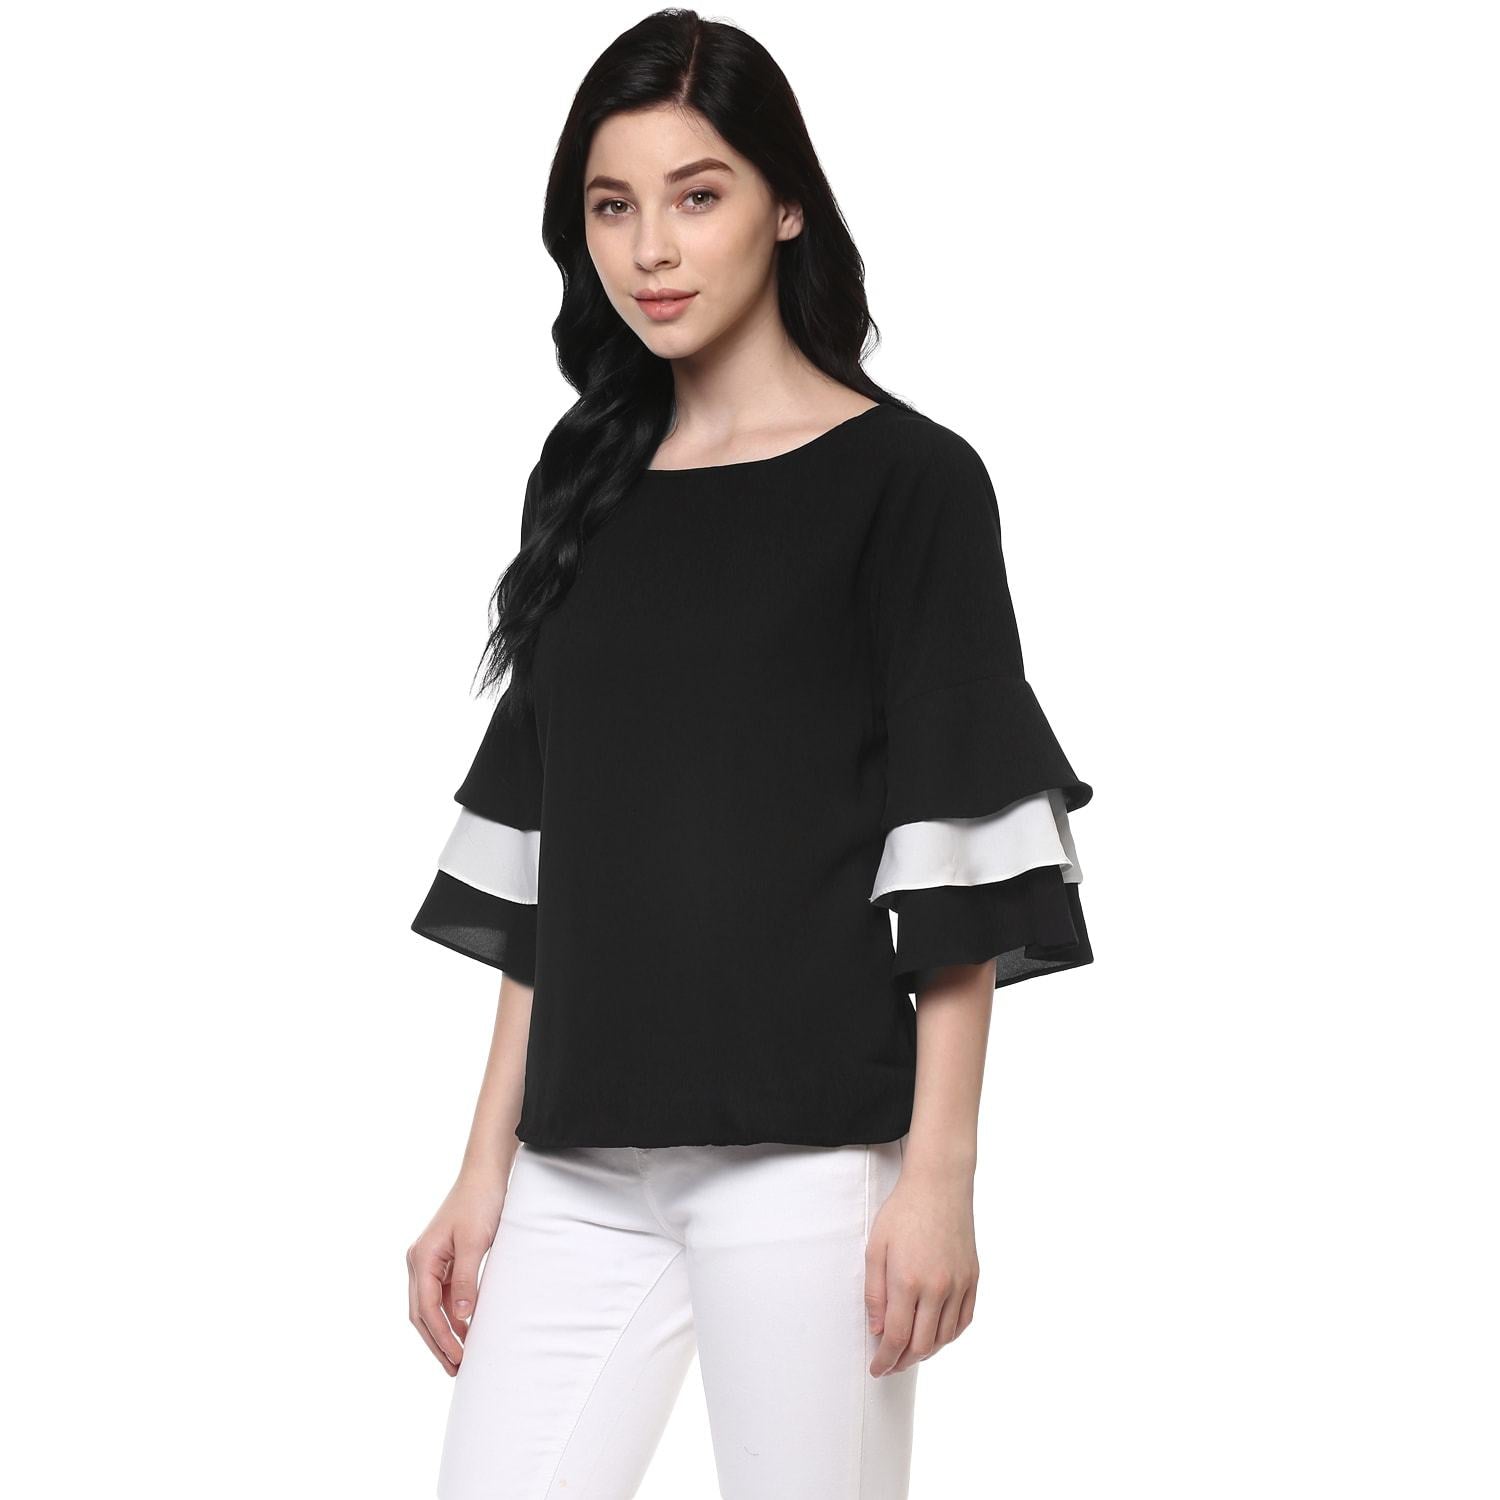 Women's Solid Monocromatic Flare Sleeve Top - Pannkh